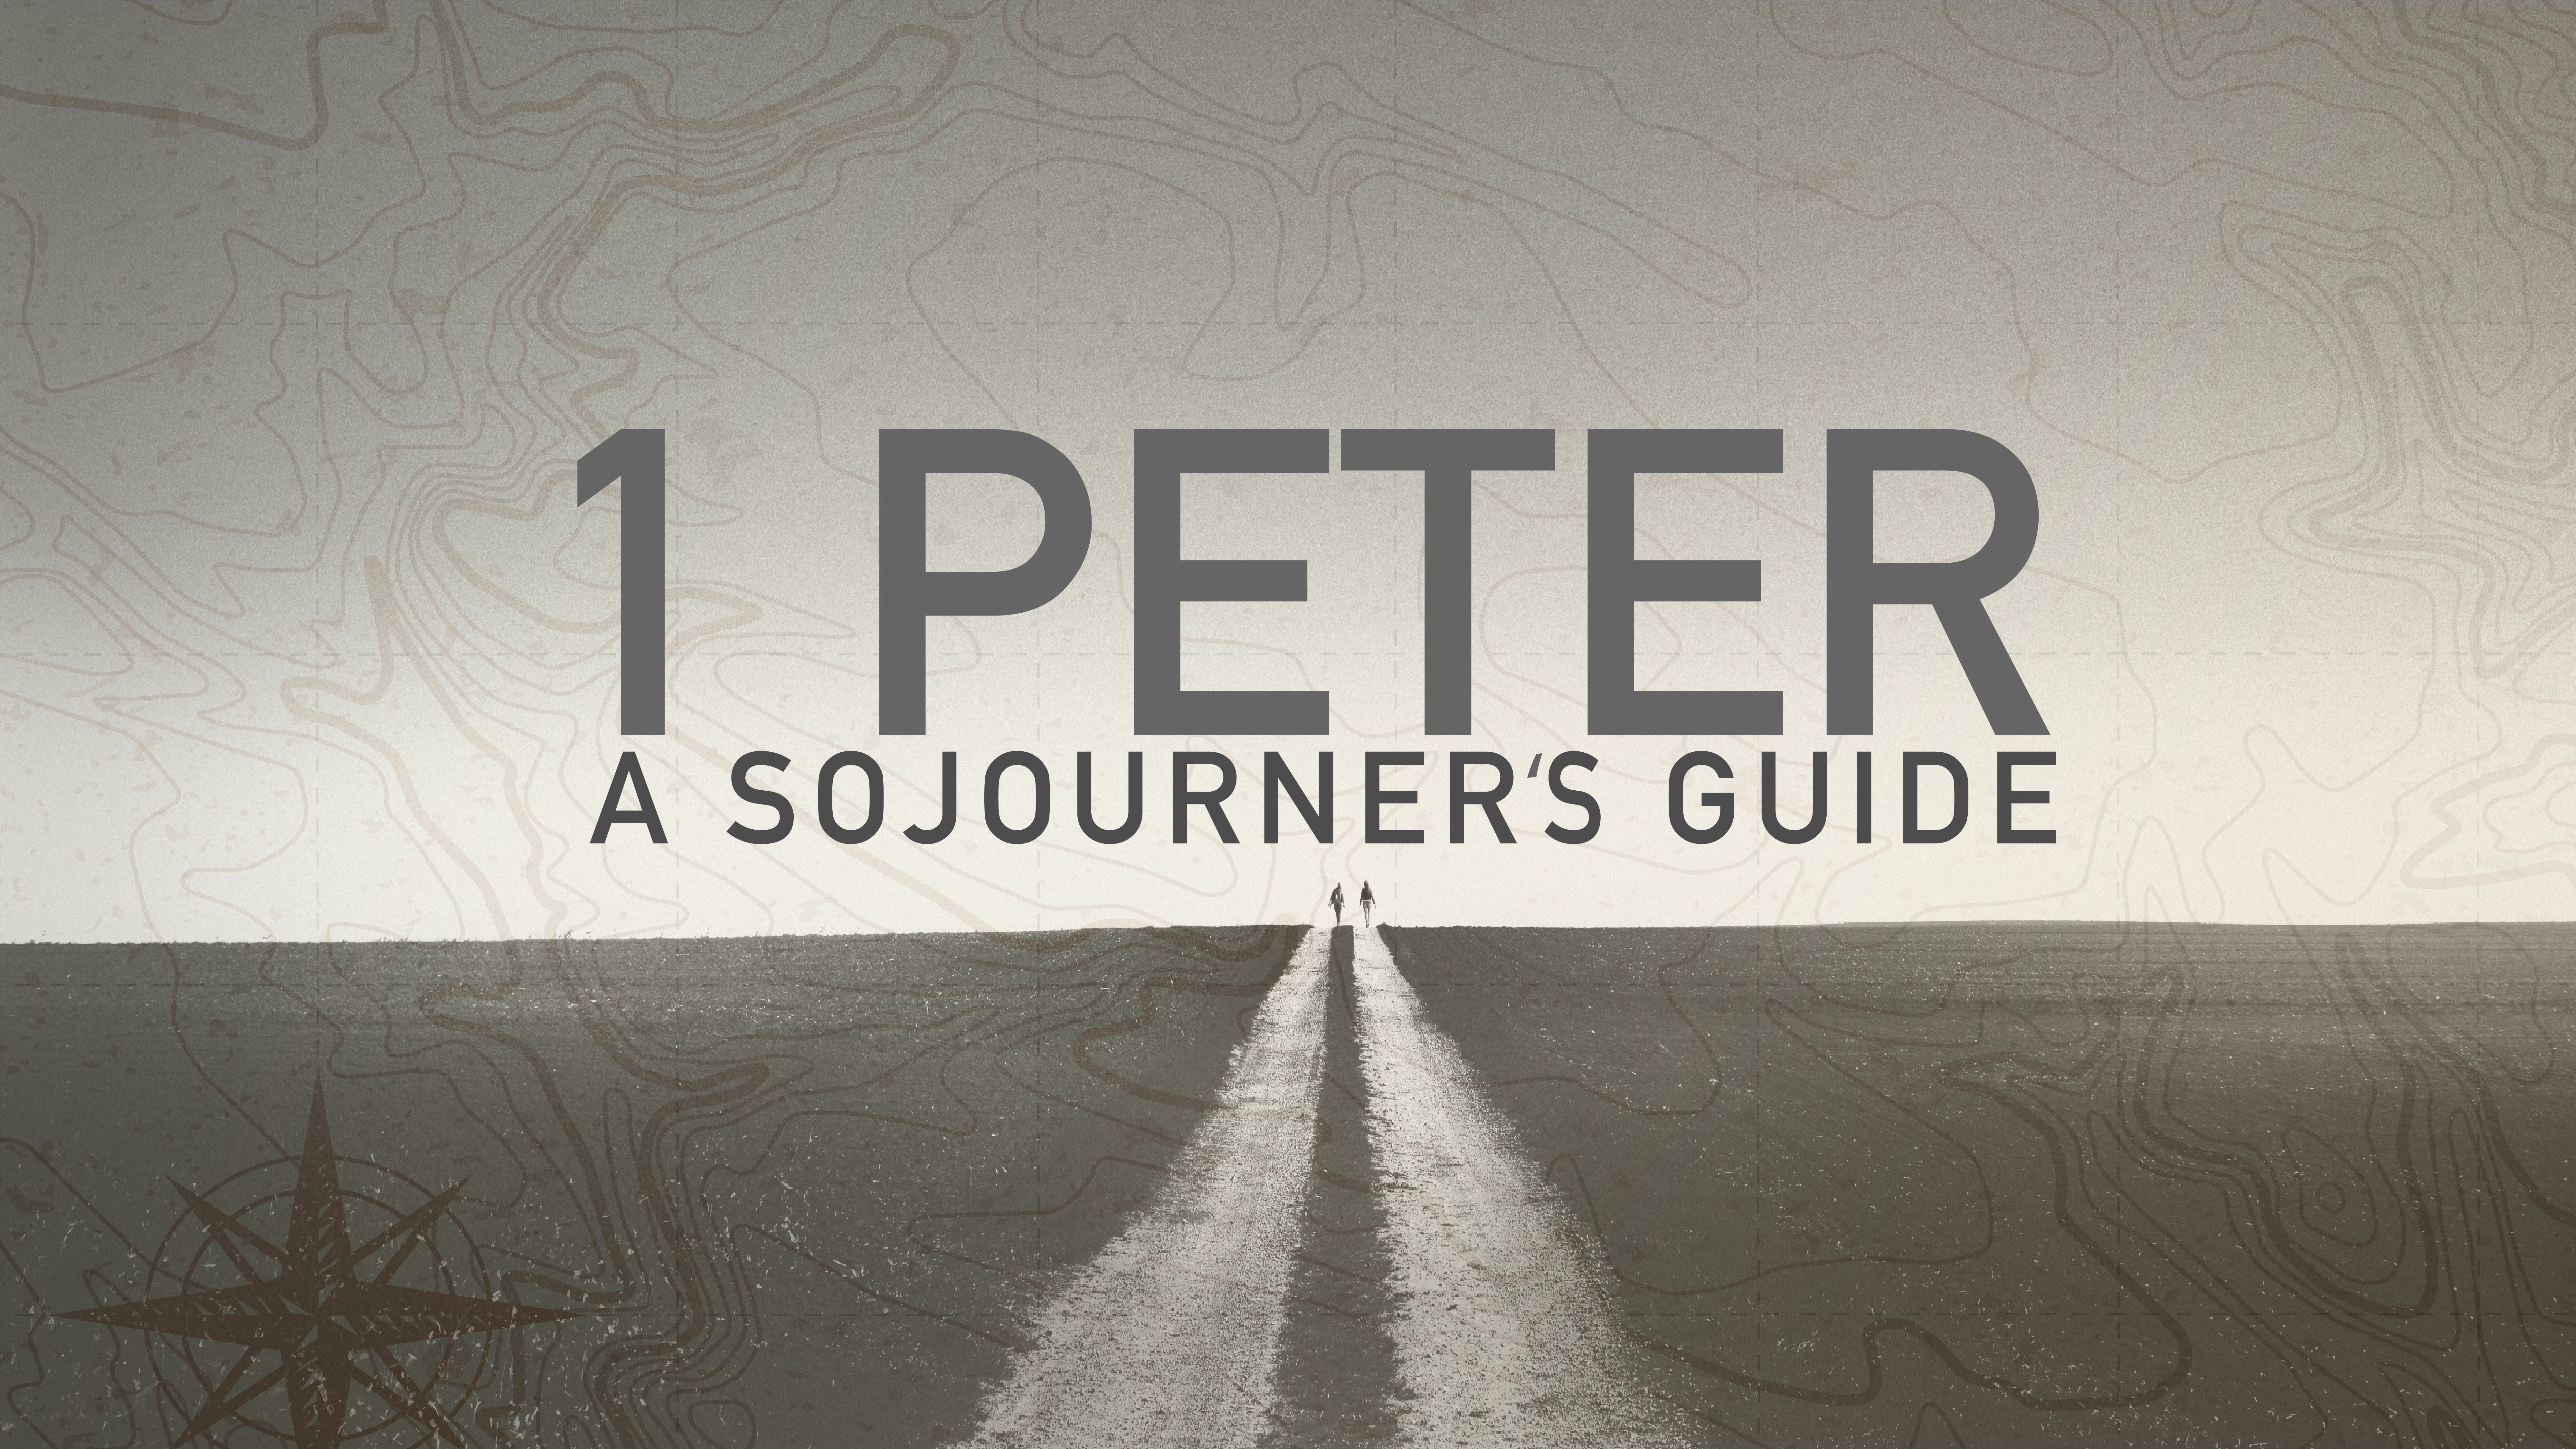 1st Peter: A Sojourner's Guide